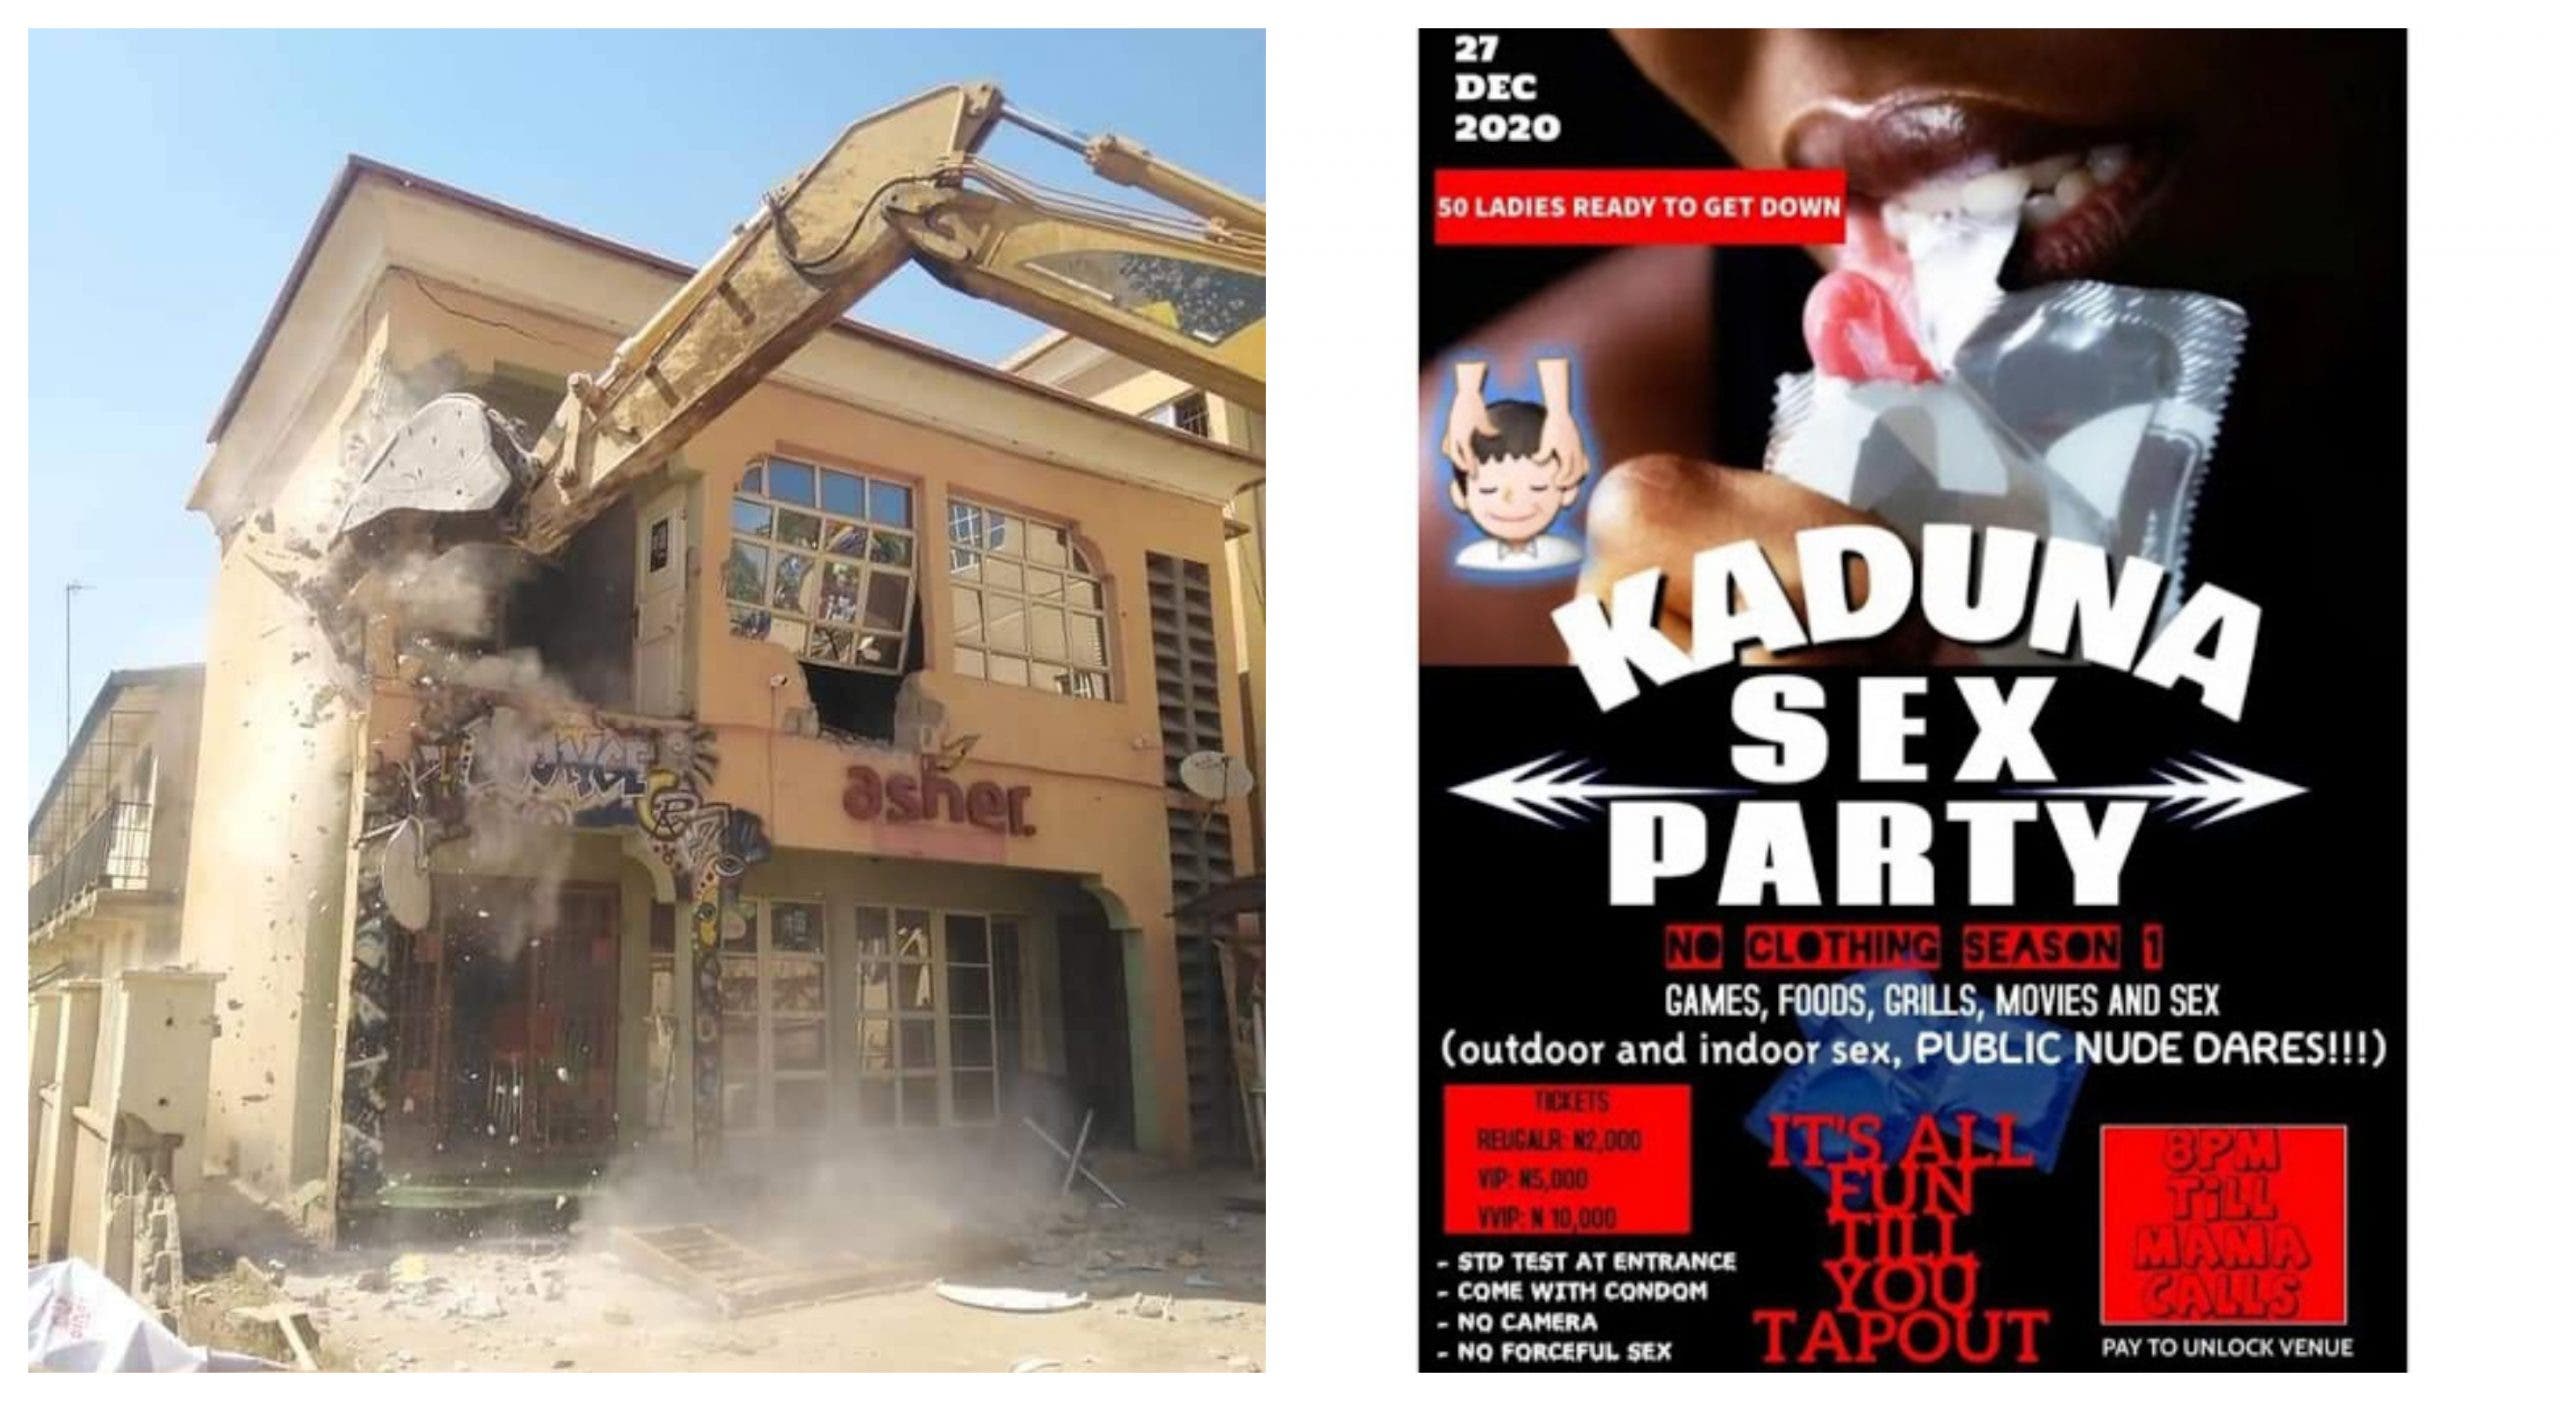 No Sex Party Happened In Kaduna, Police Witnesses Tell Court